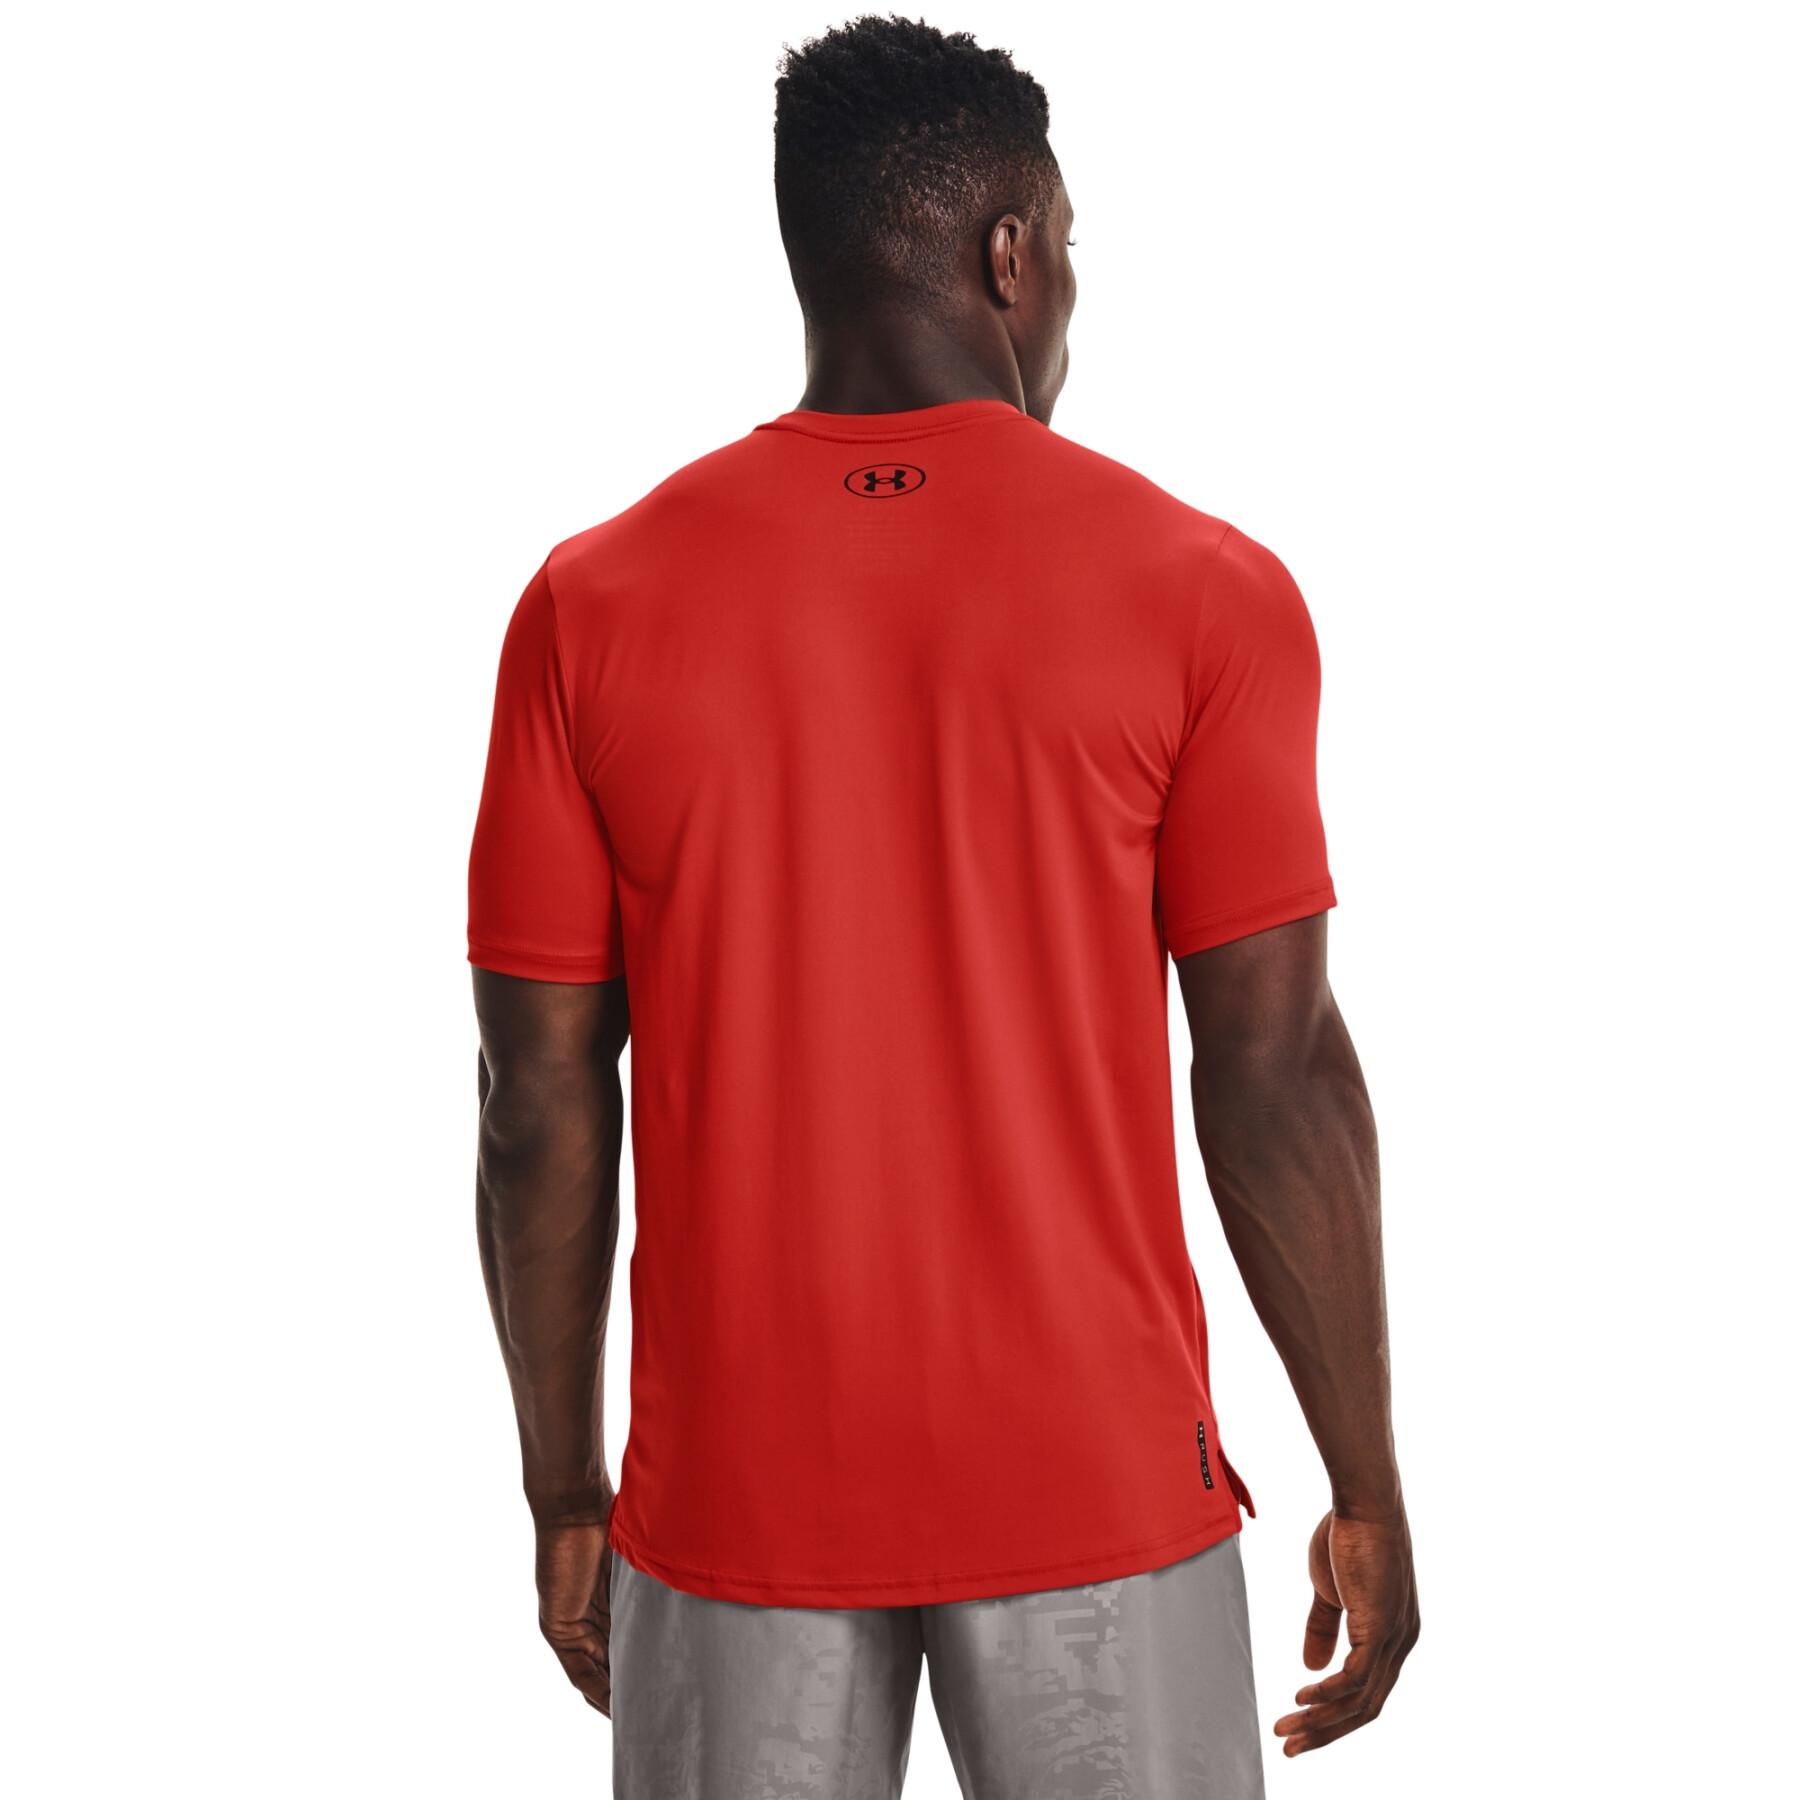 Jersey Under Armour Rush™ Energy